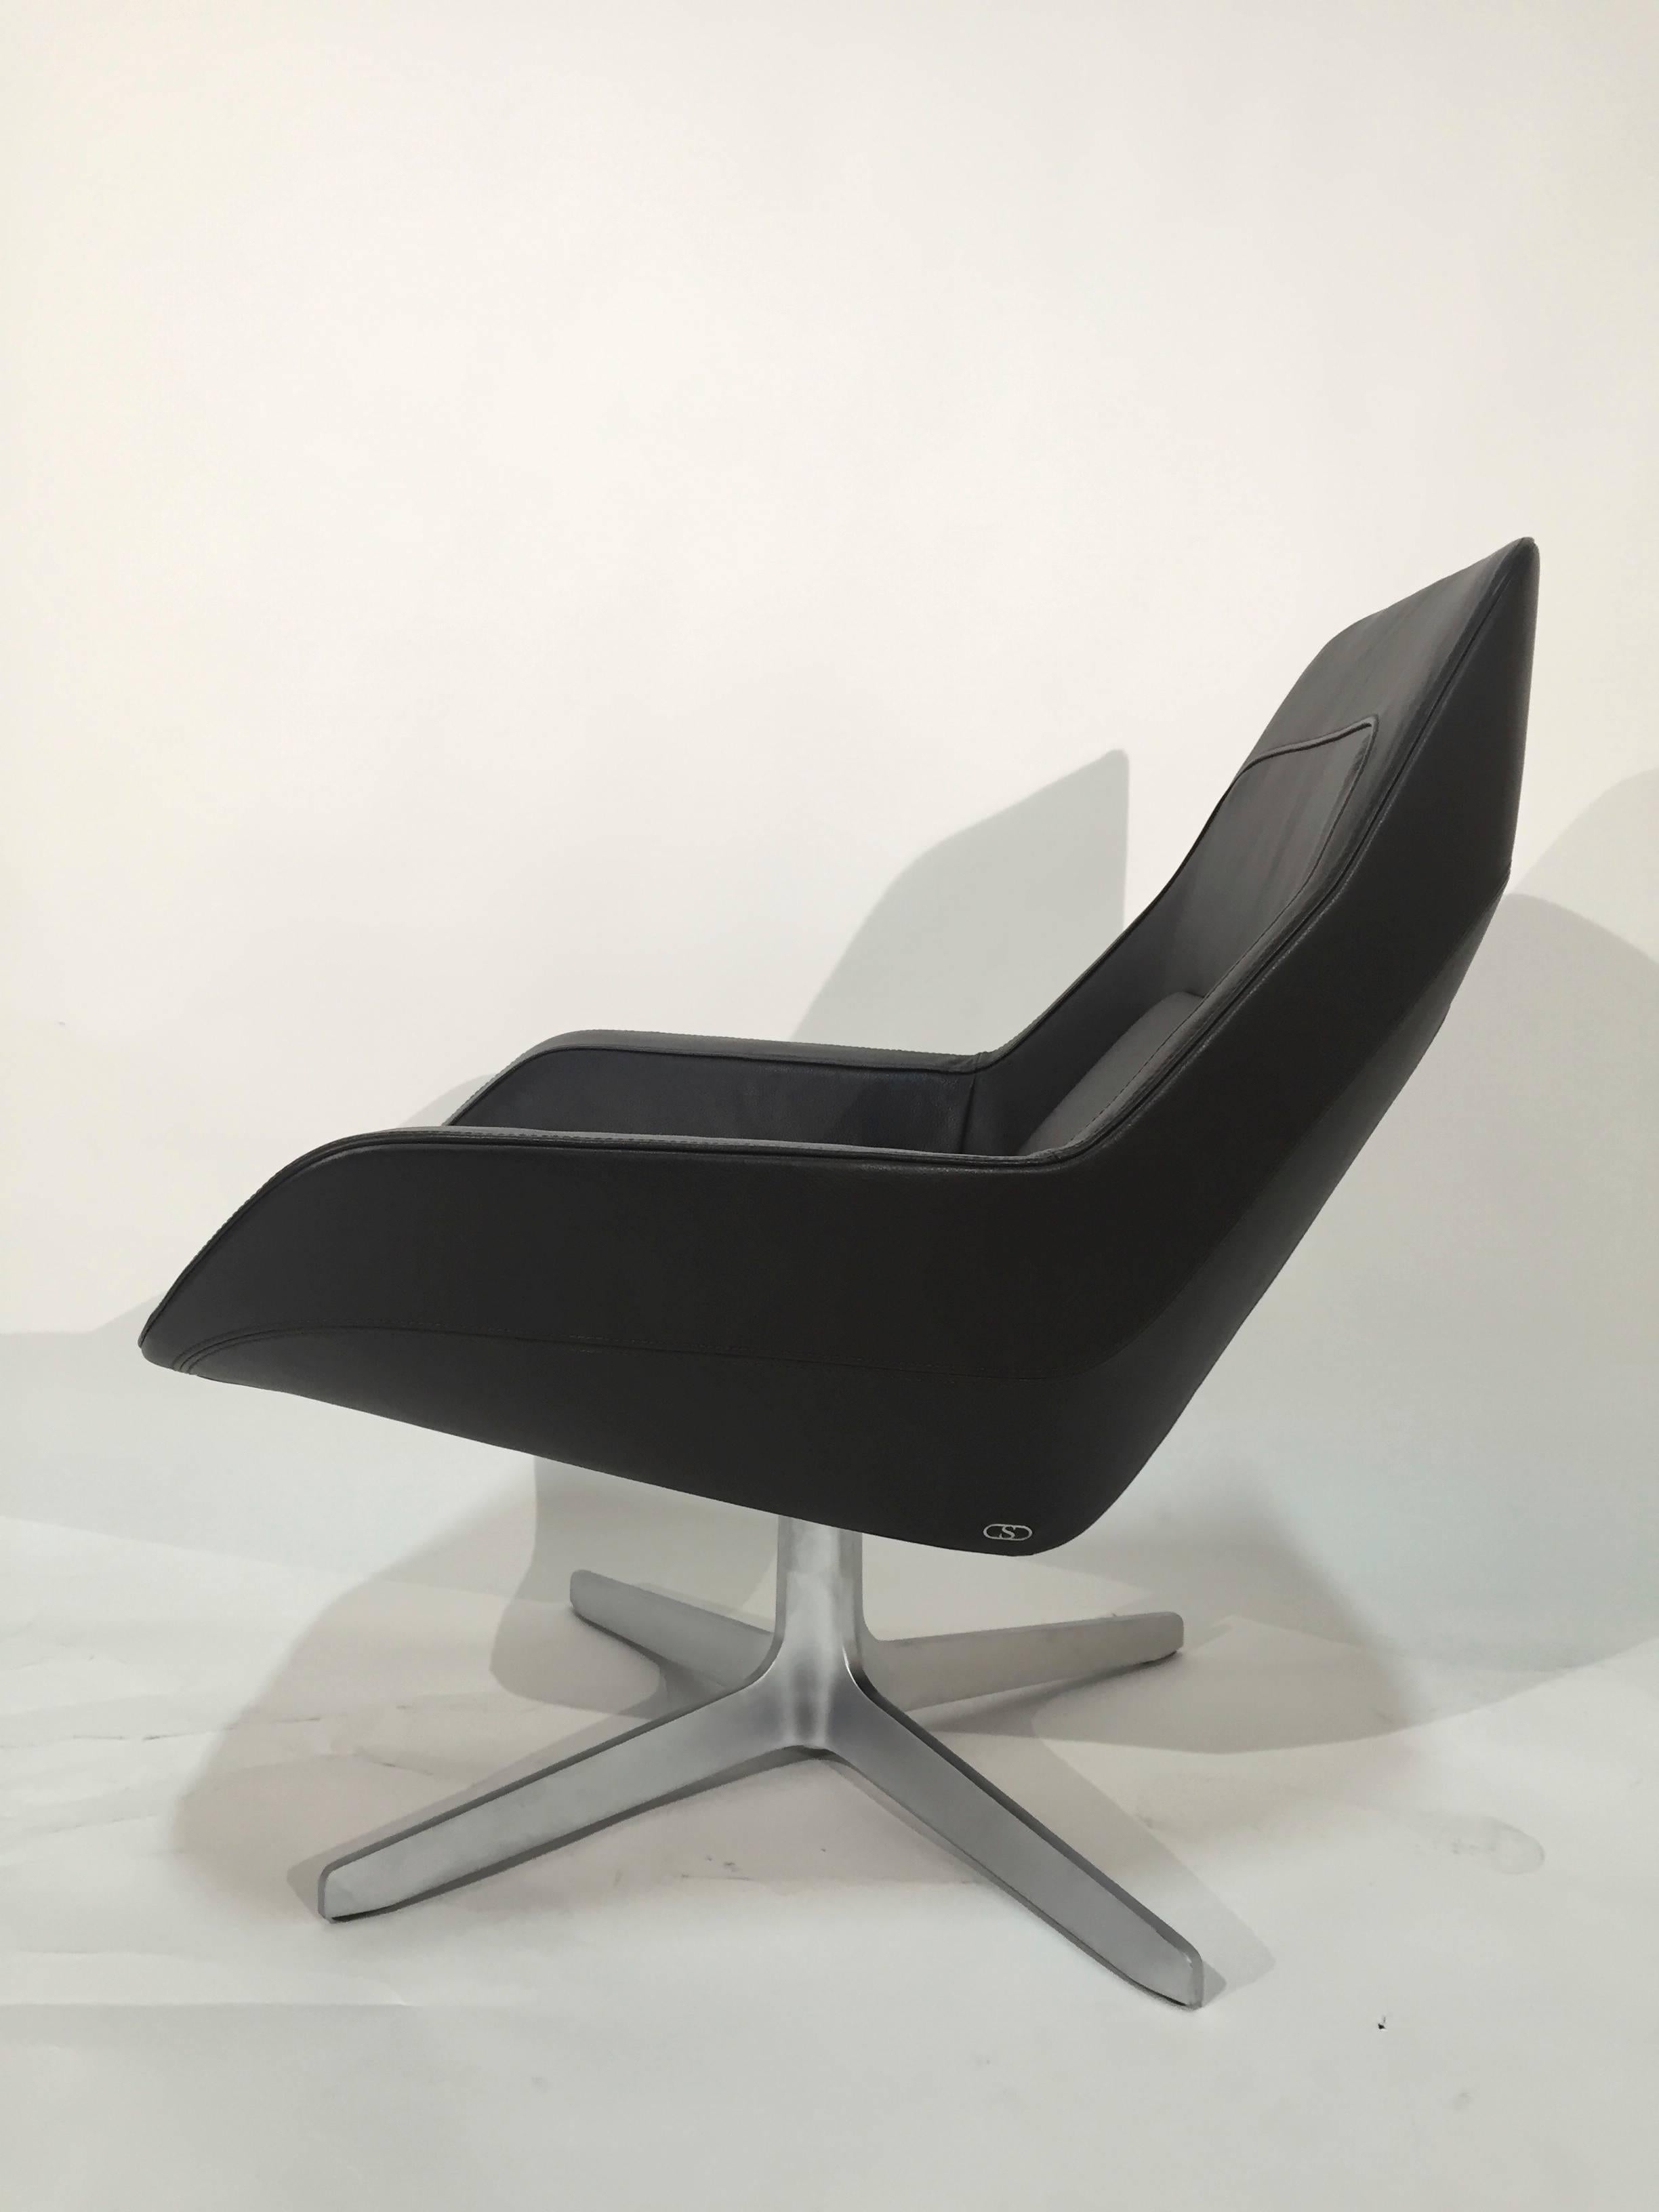 De Sede DS-144 armchair in leather select cigarro.

Designed by Werner Aisslinger.
Two-fold polyurethane frame, polished aluminum base, swivel function.

Dimensions:
Width 29 in,
height 33 in,
depth 33 in,
seat height 15 in,
armrest height